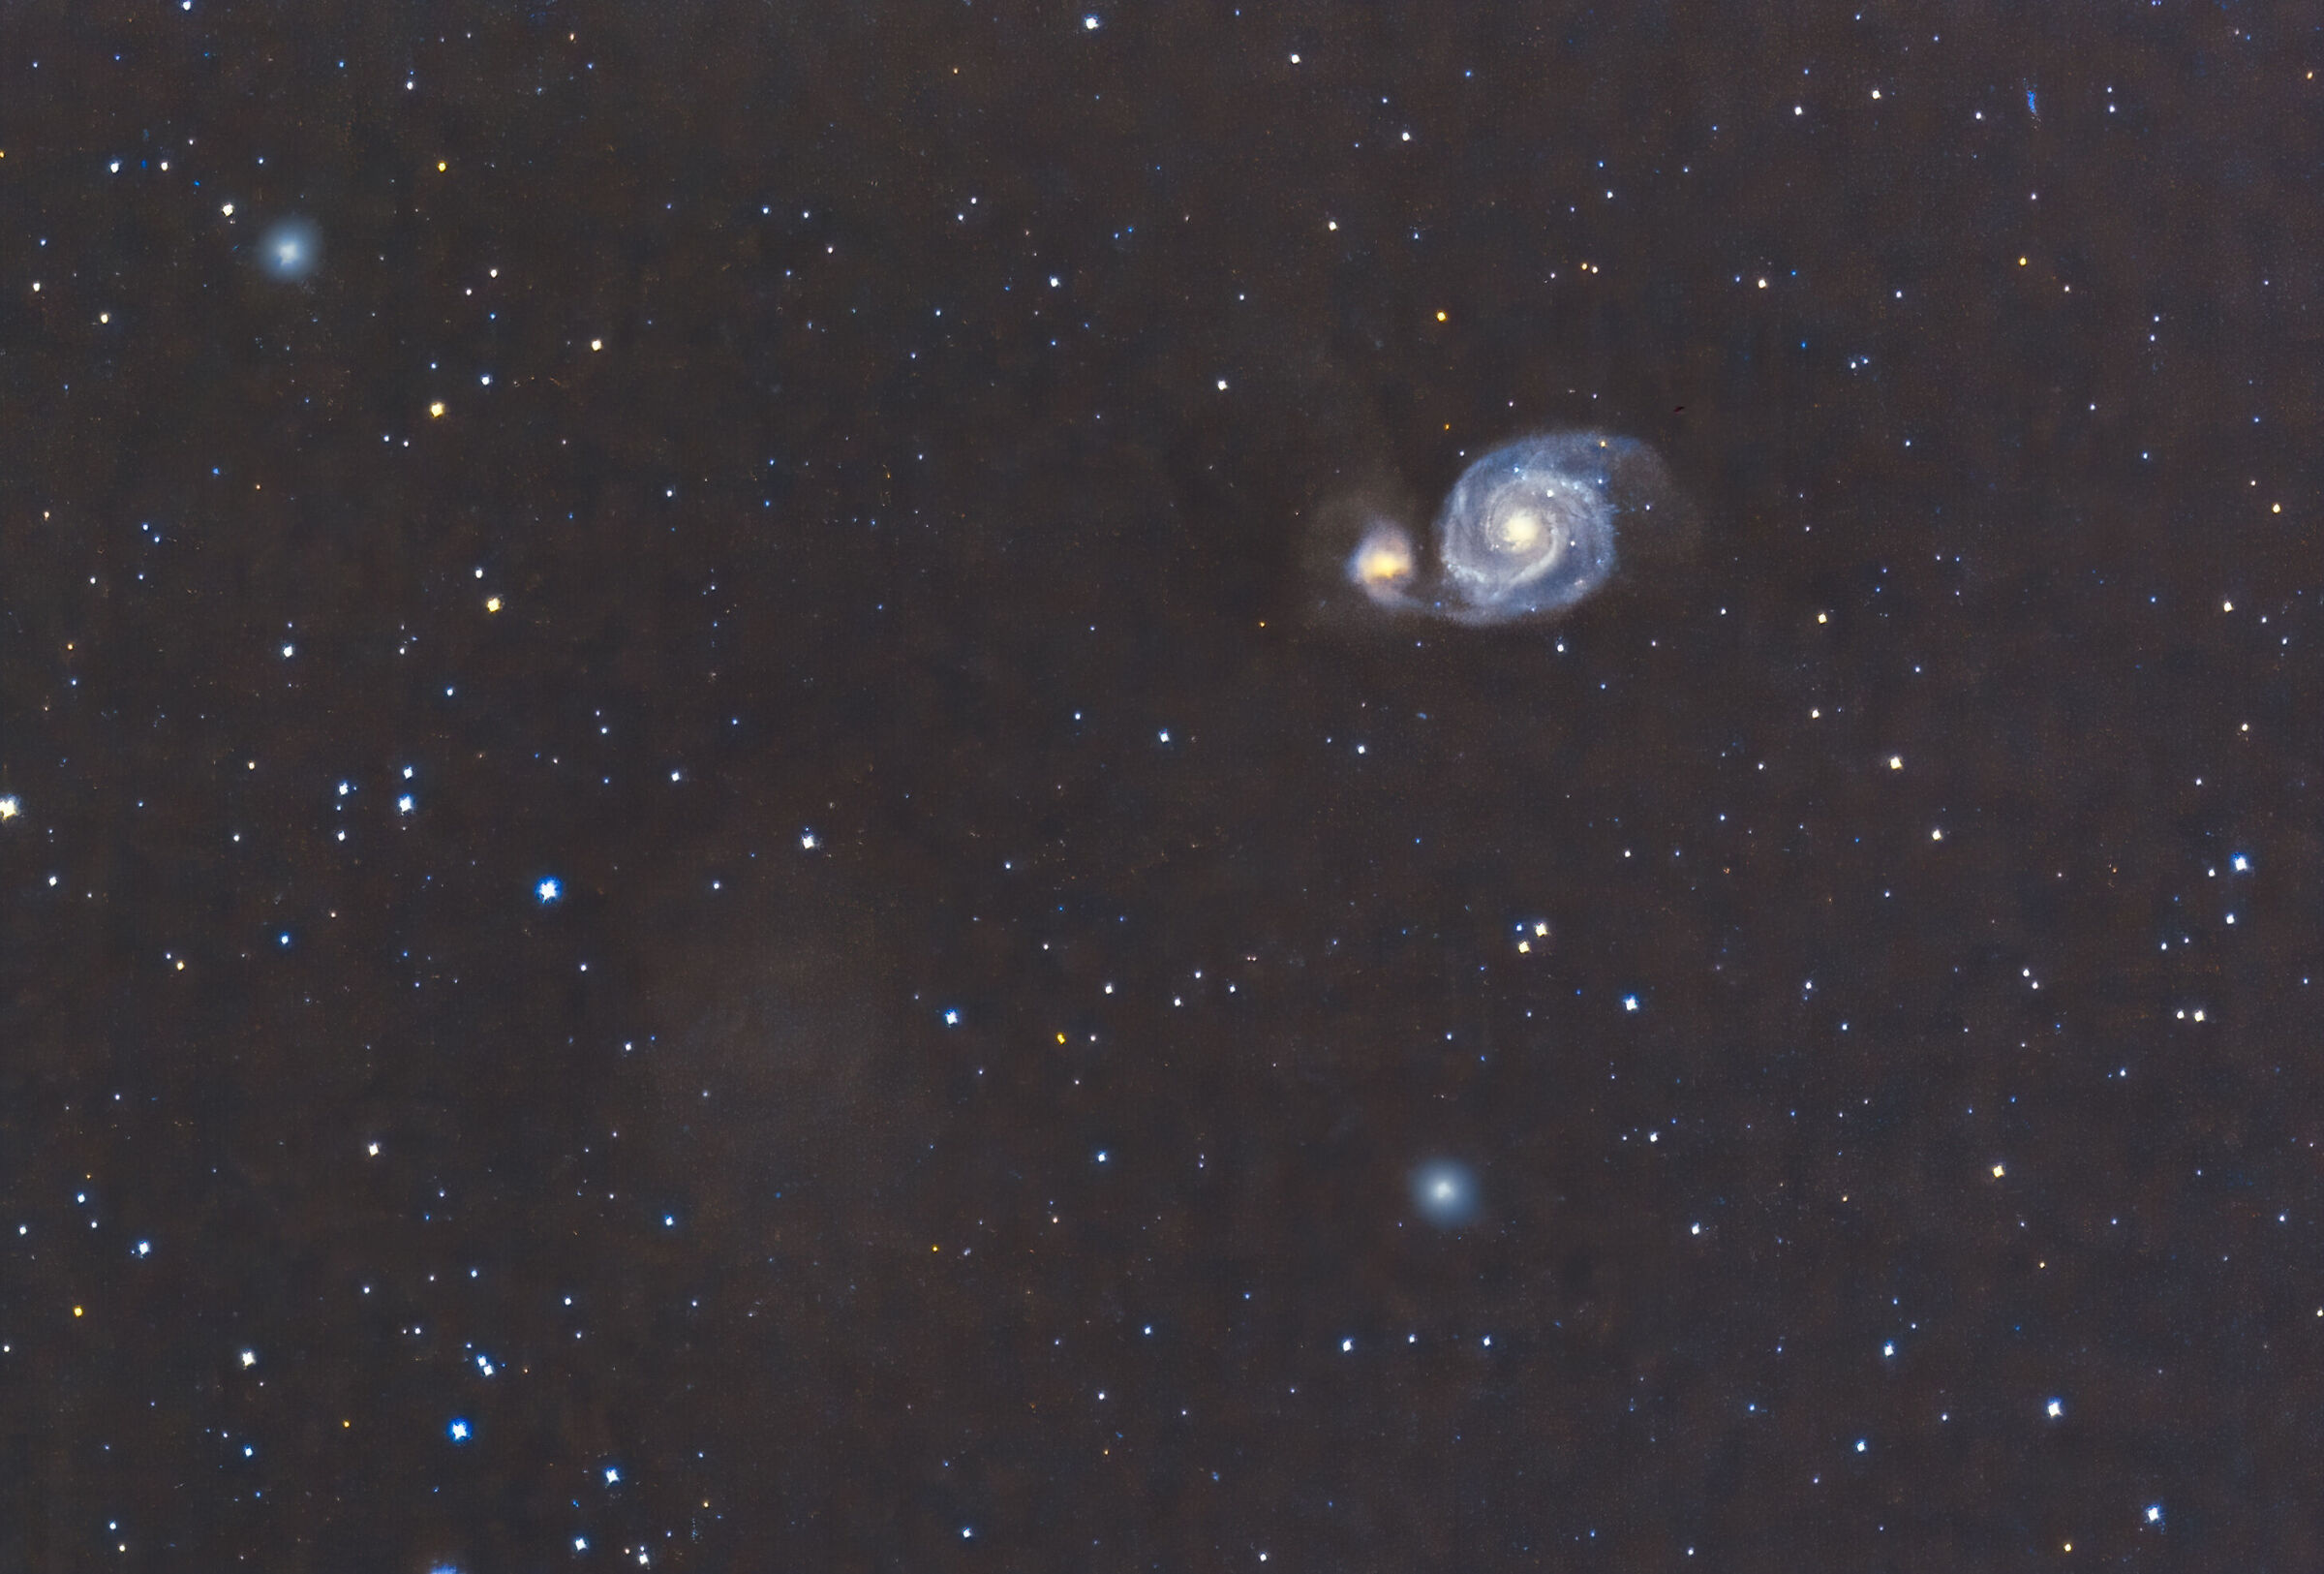  m 51 from the balcony of Mariano Comense...